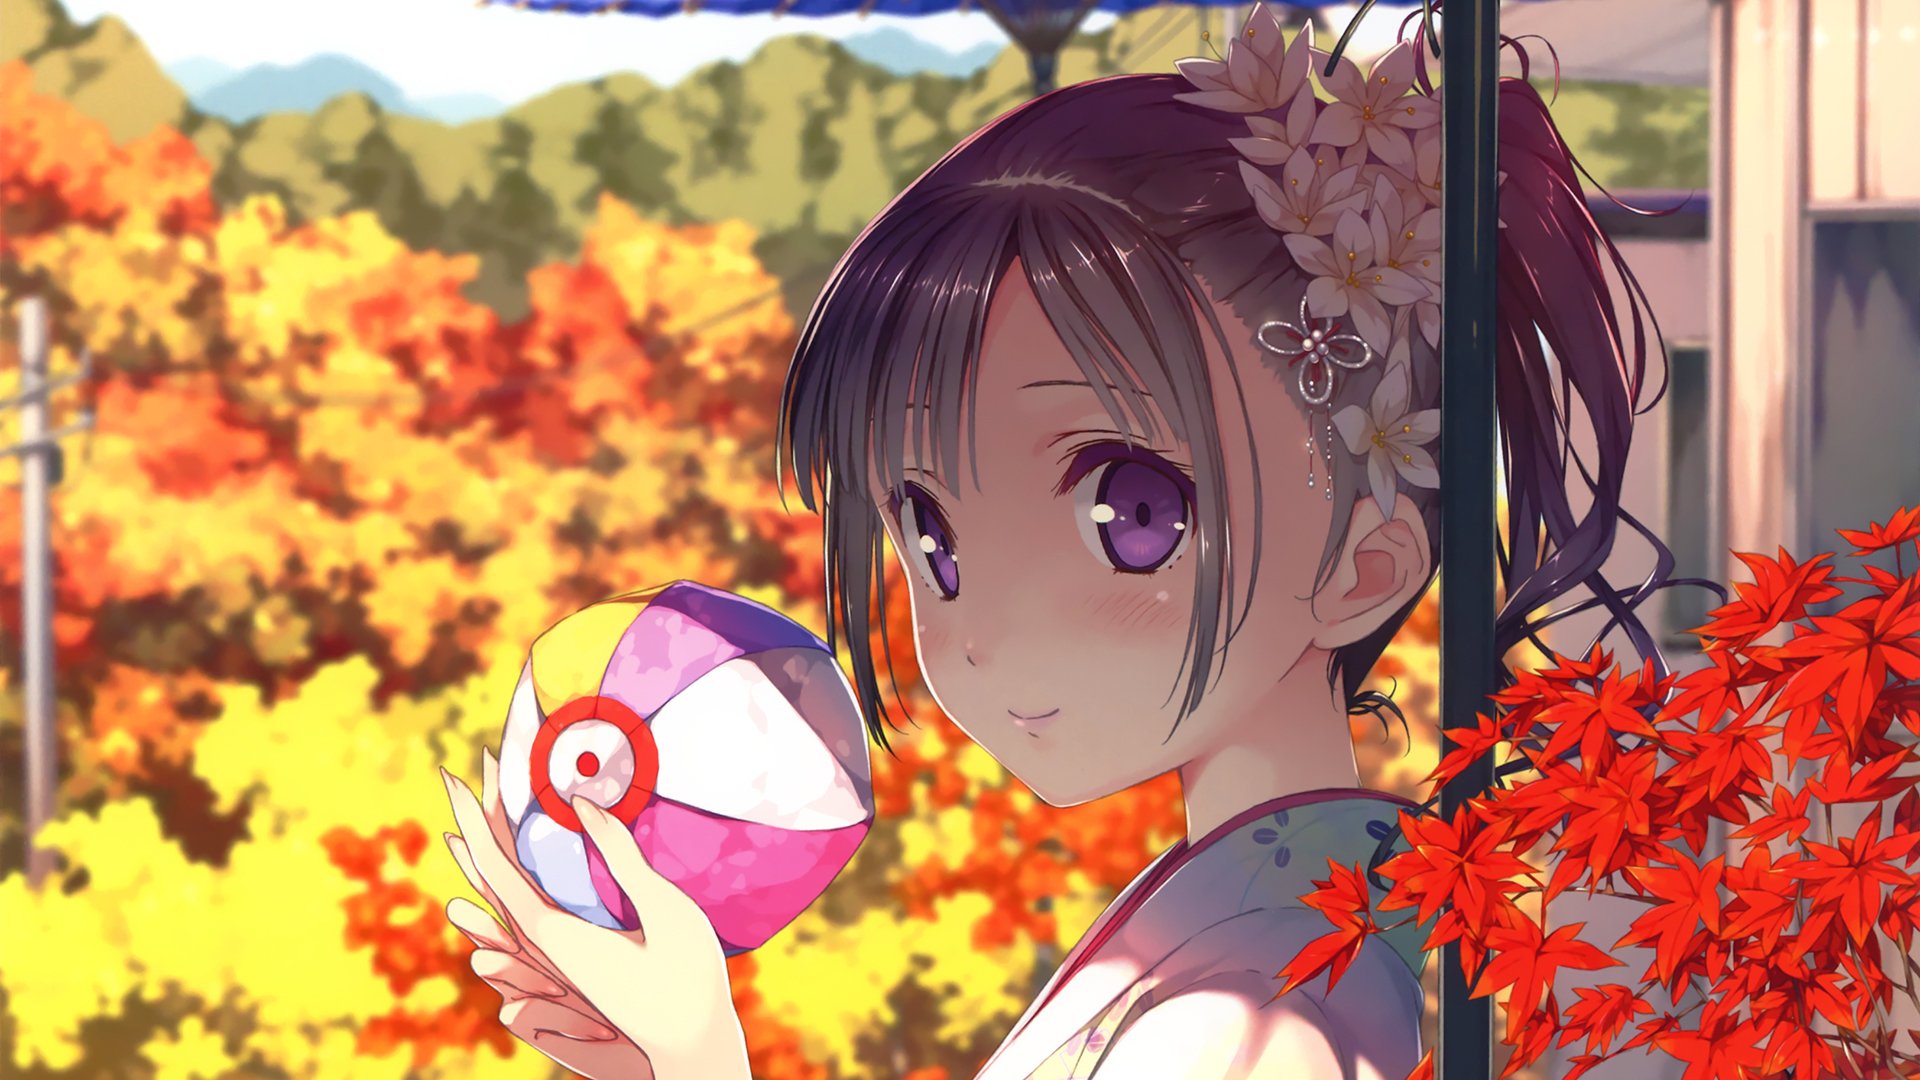 HD desktop wallpaper of a cute anime girl with purple eyes, wearing Japanese clothes and holding a colorful ball, surrounded by vibrant autumn maple leaves.